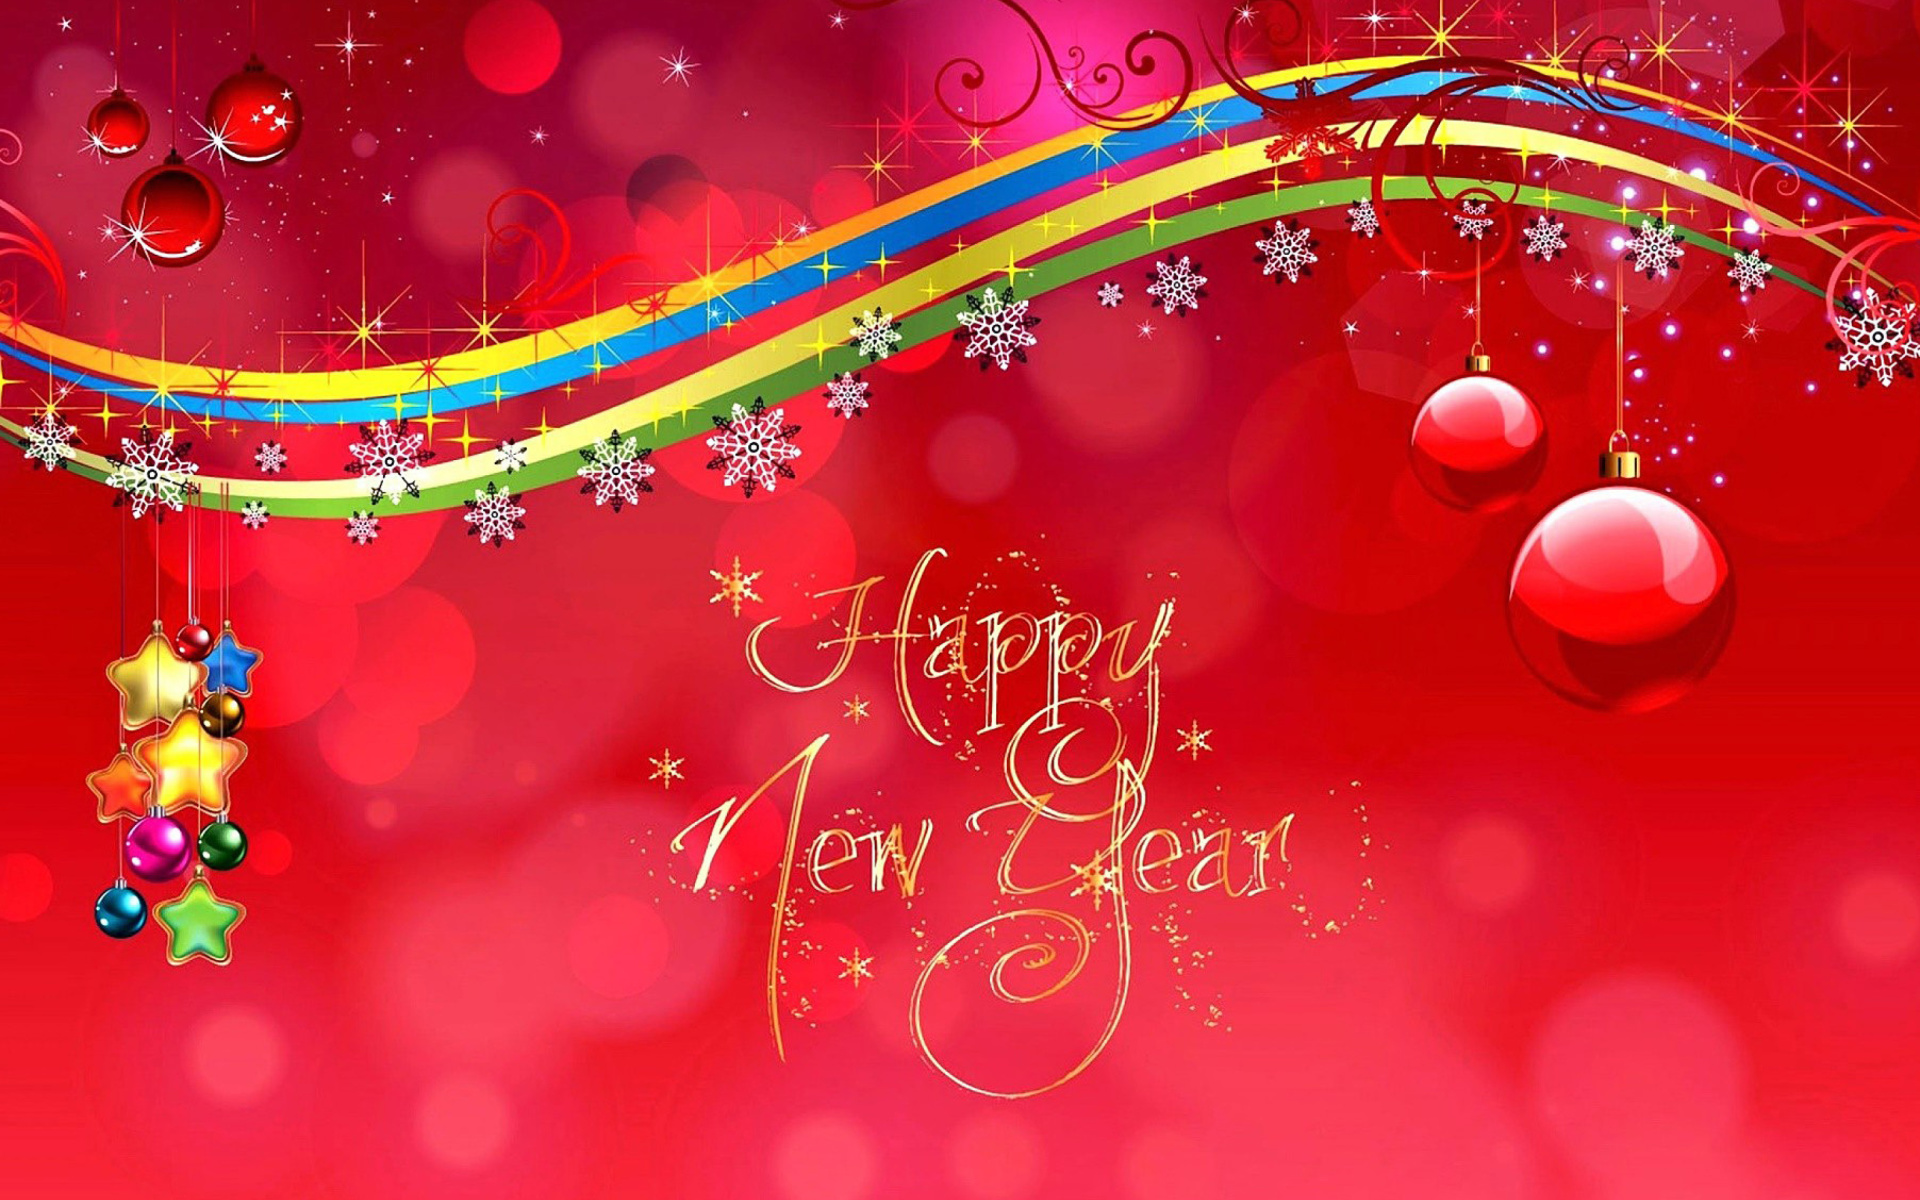 Happy New Year Red Design wallpaper 1920x1200